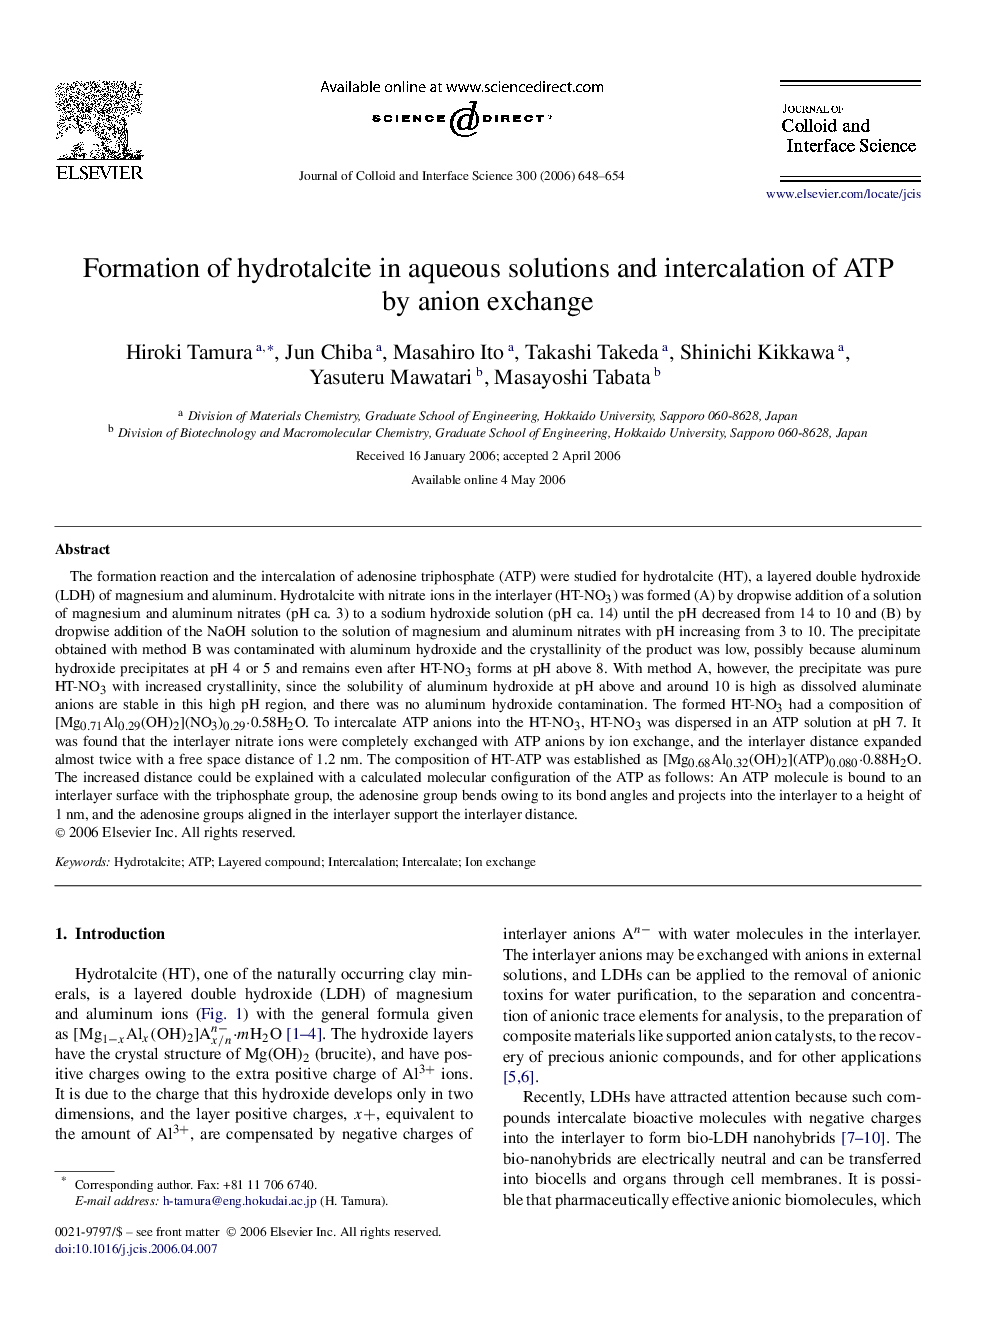 Formation of hydrotalcite in aqueous solutions and intercalation of ATP by anion exchange